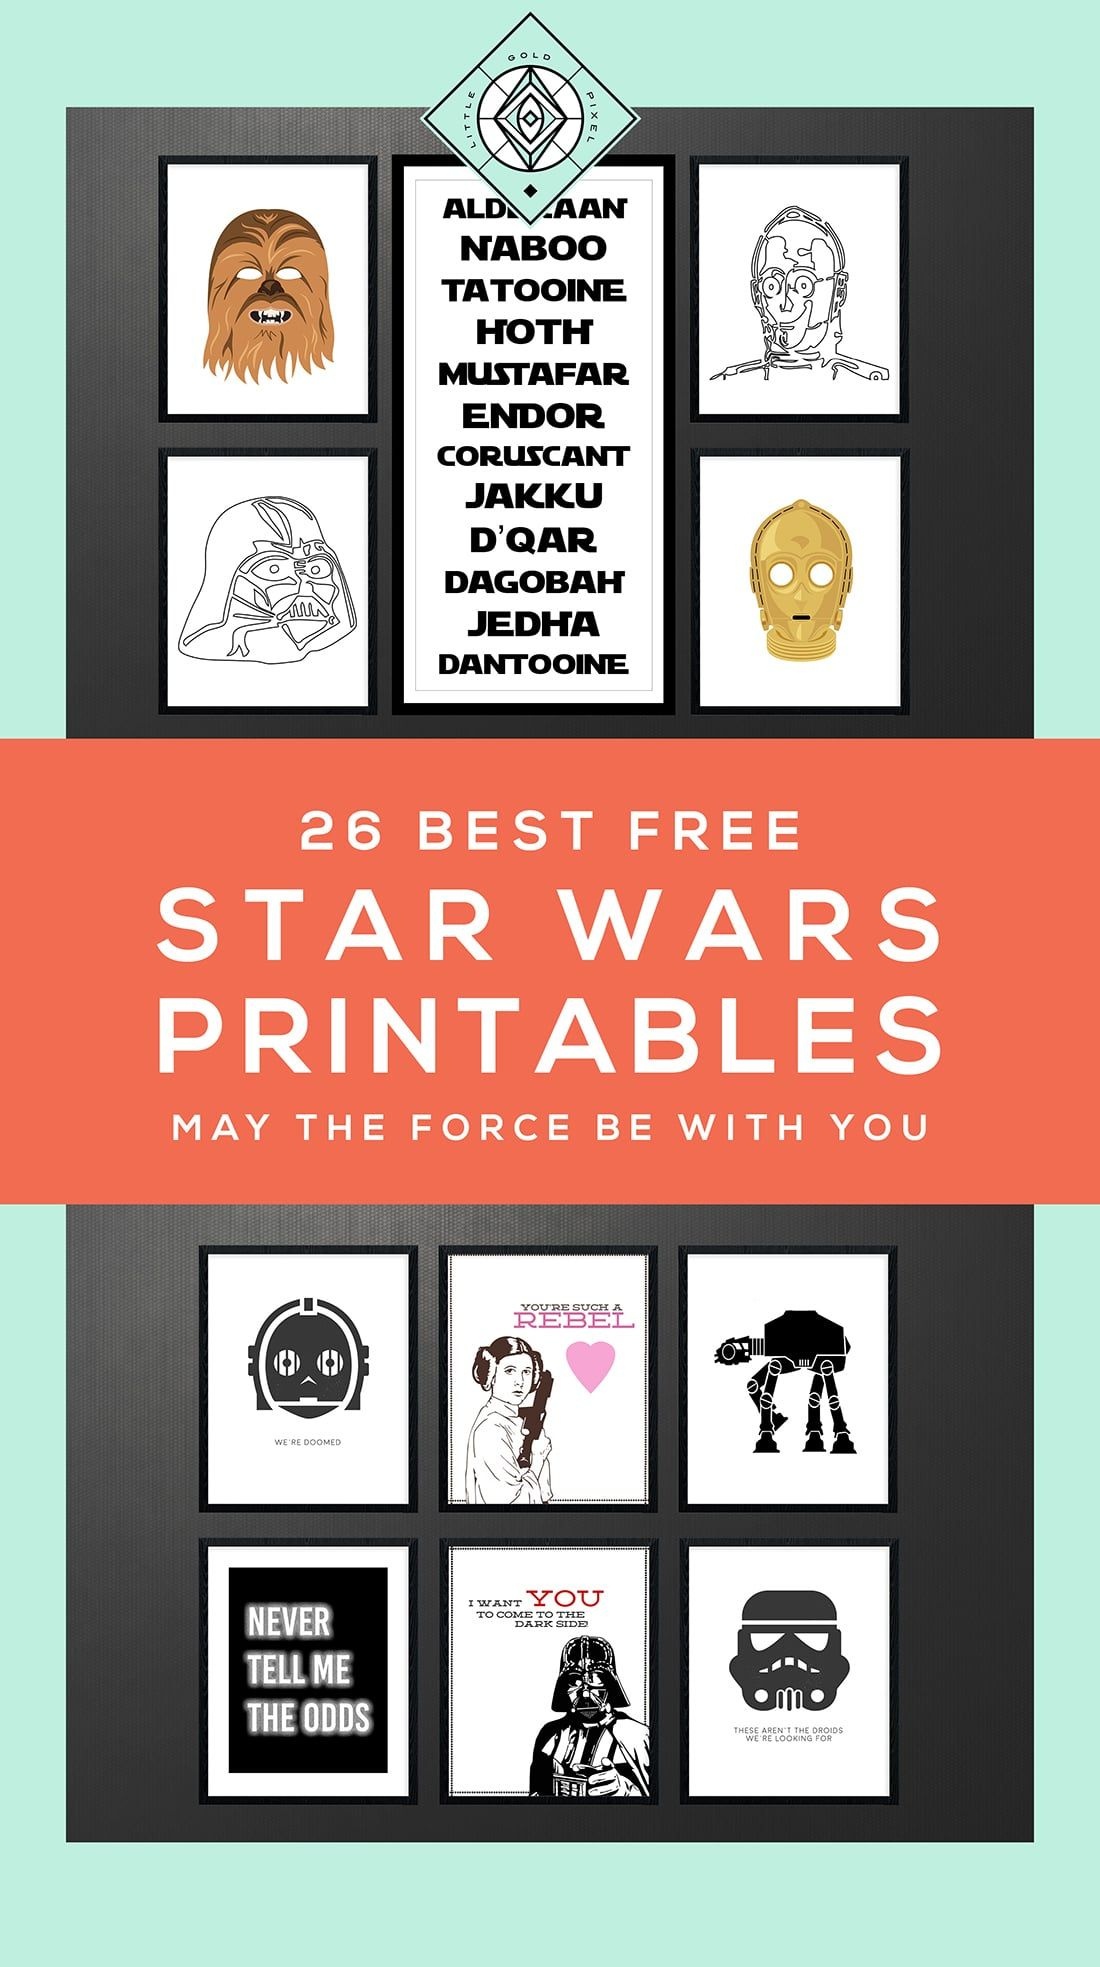 Star Wars Free Printables • A Roundup | Free Printables • Roundups - May The Force Be With You Free Printable